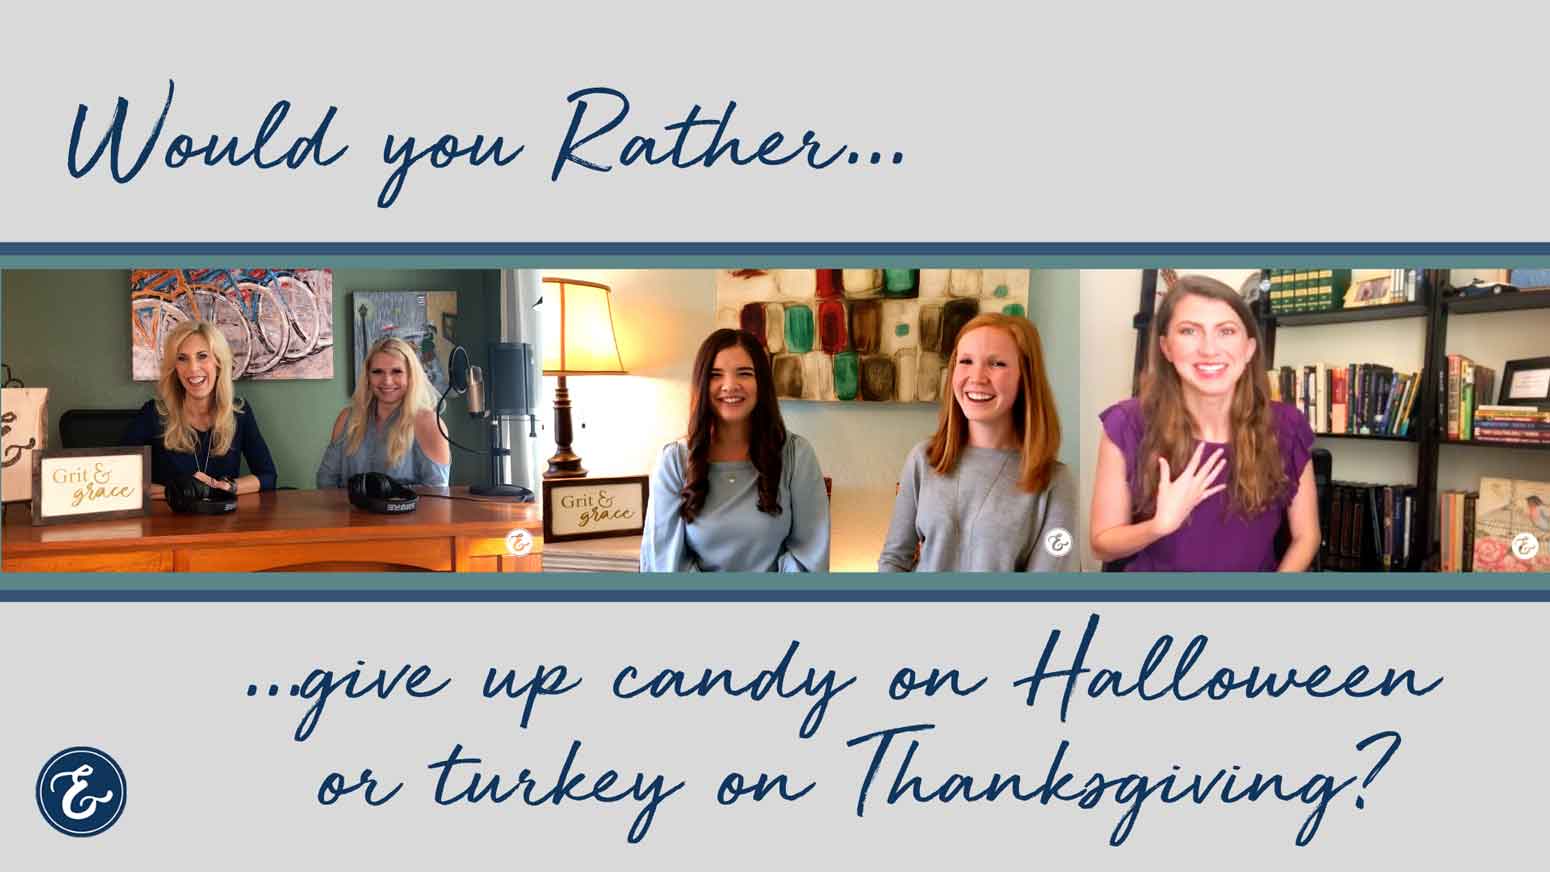 Would you rather candy or turkey